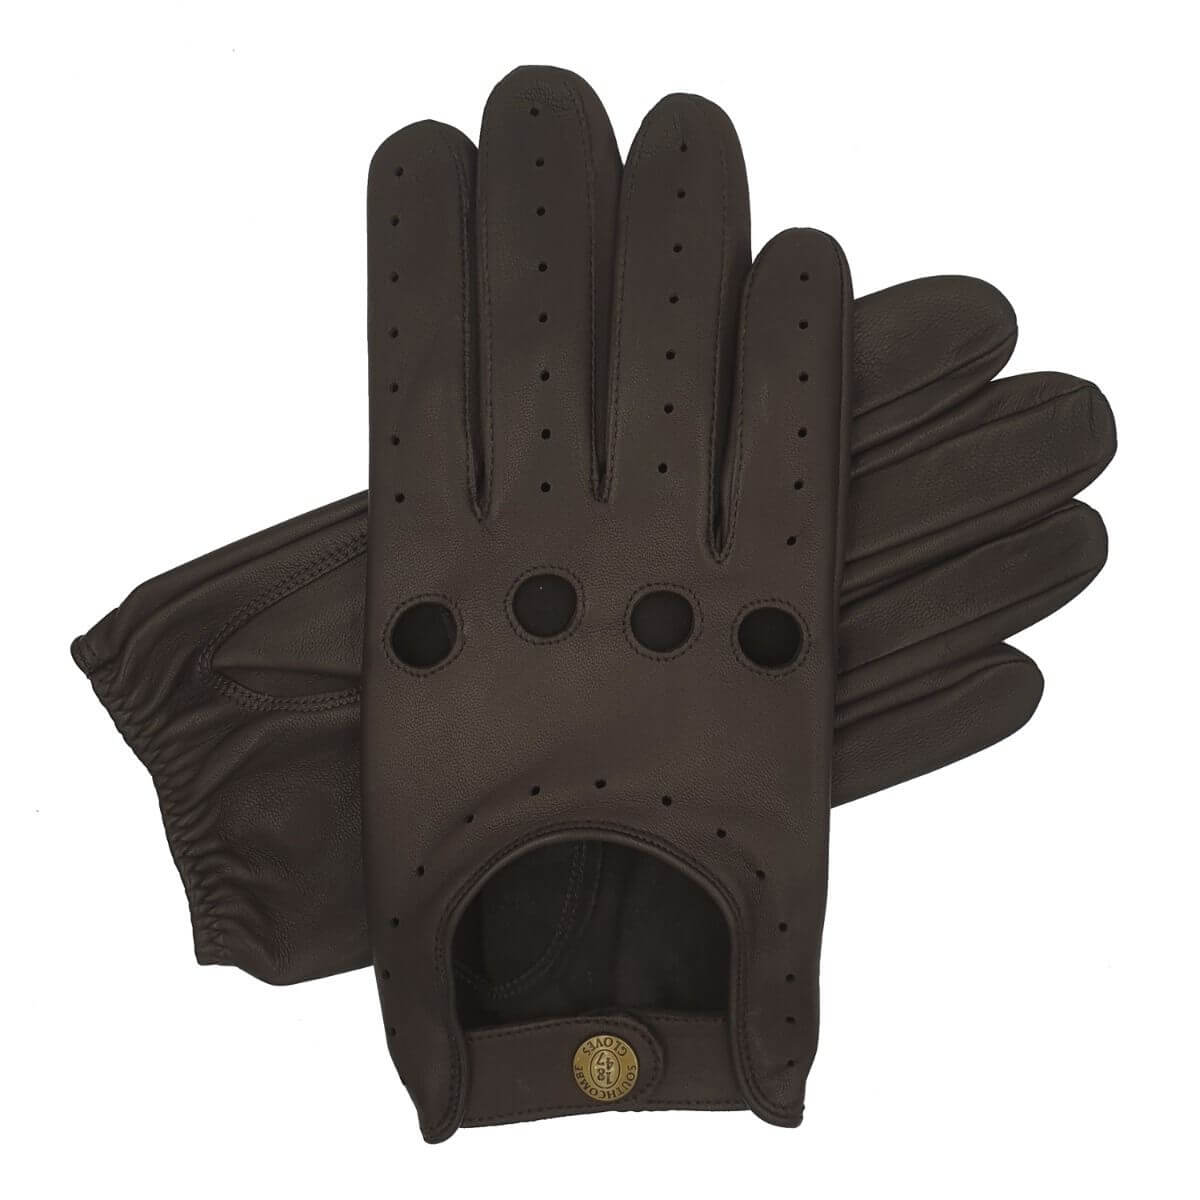 Southcombe Cooper - Men's Unlined Leather Driving Glove - Brown